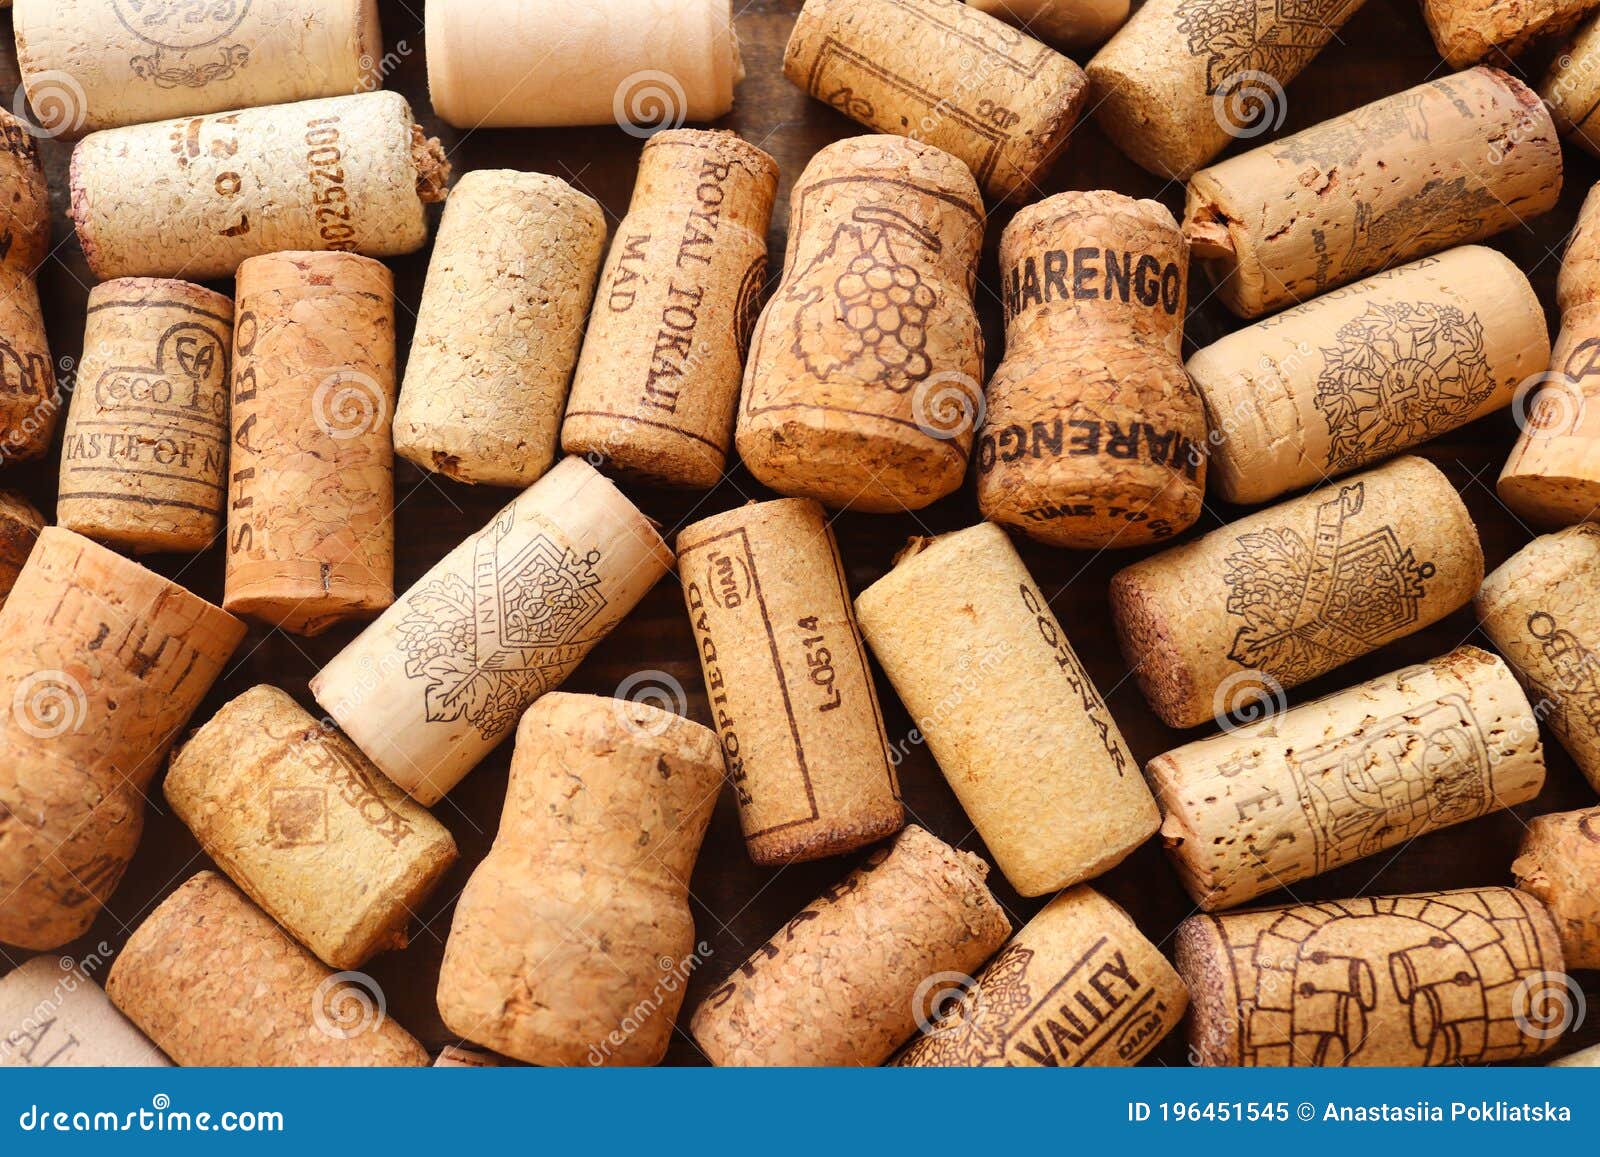 Wine Corks Background. Close-up Texture Of Wine Corks Editorial Image ...